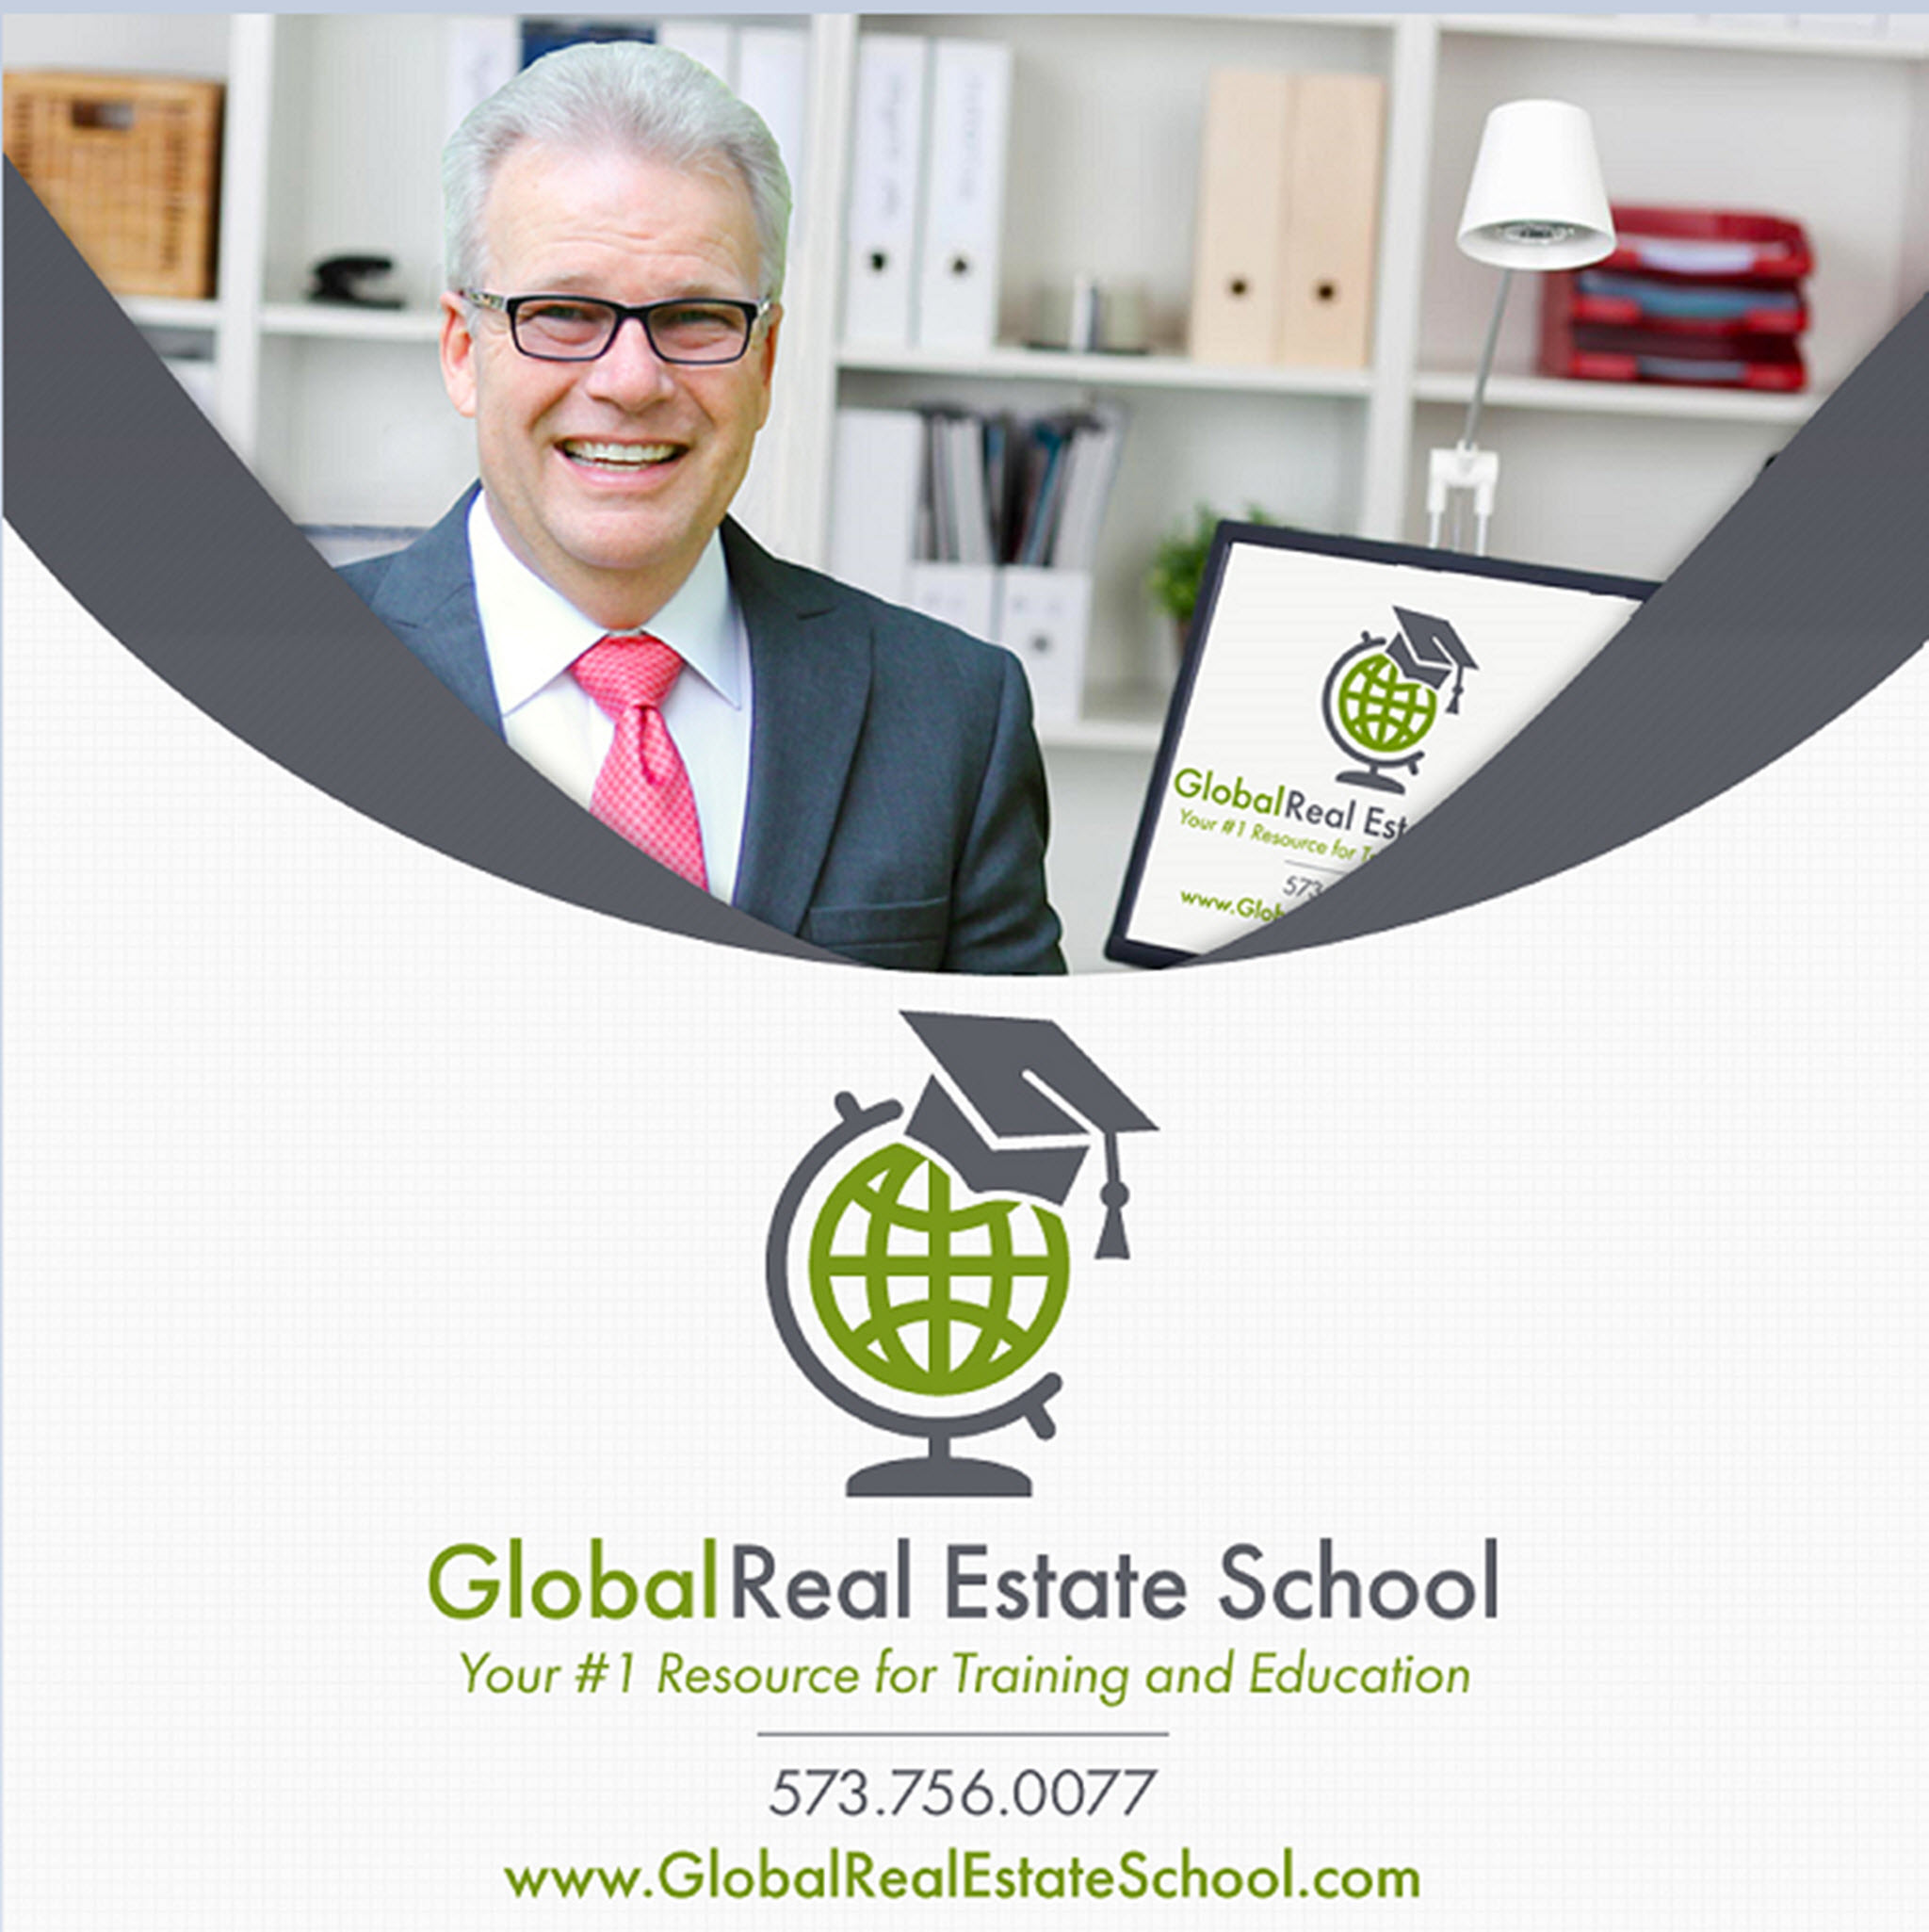 Appraisal and Valuation - Chapter 16 Recap from Global Real Estate School